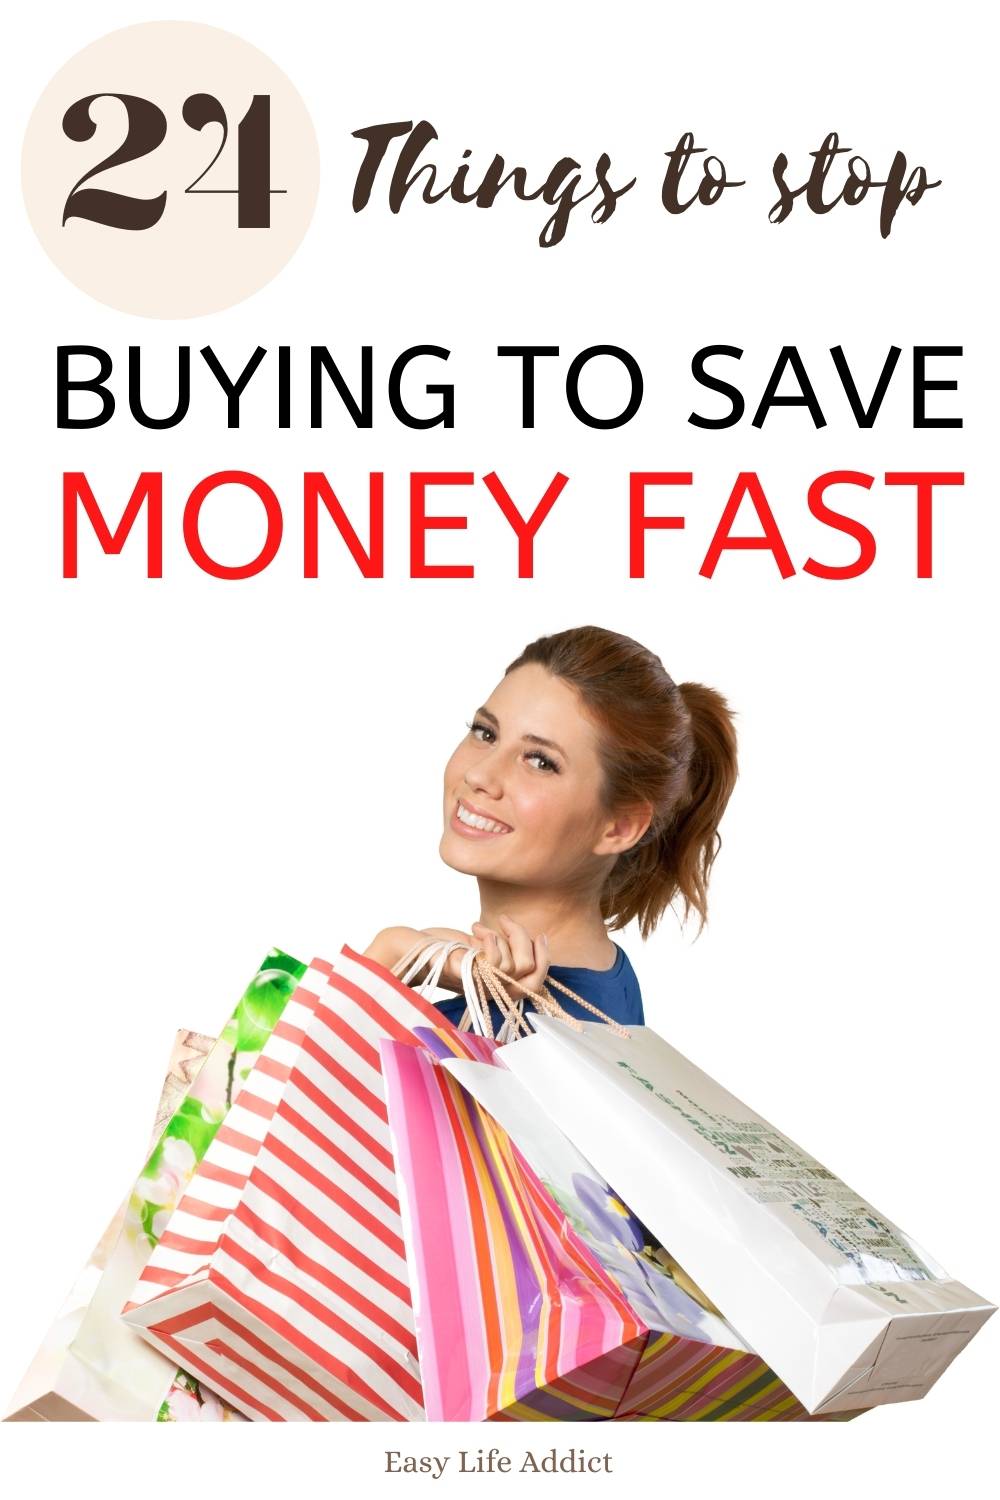 24 Things to stop buying to save money fast!